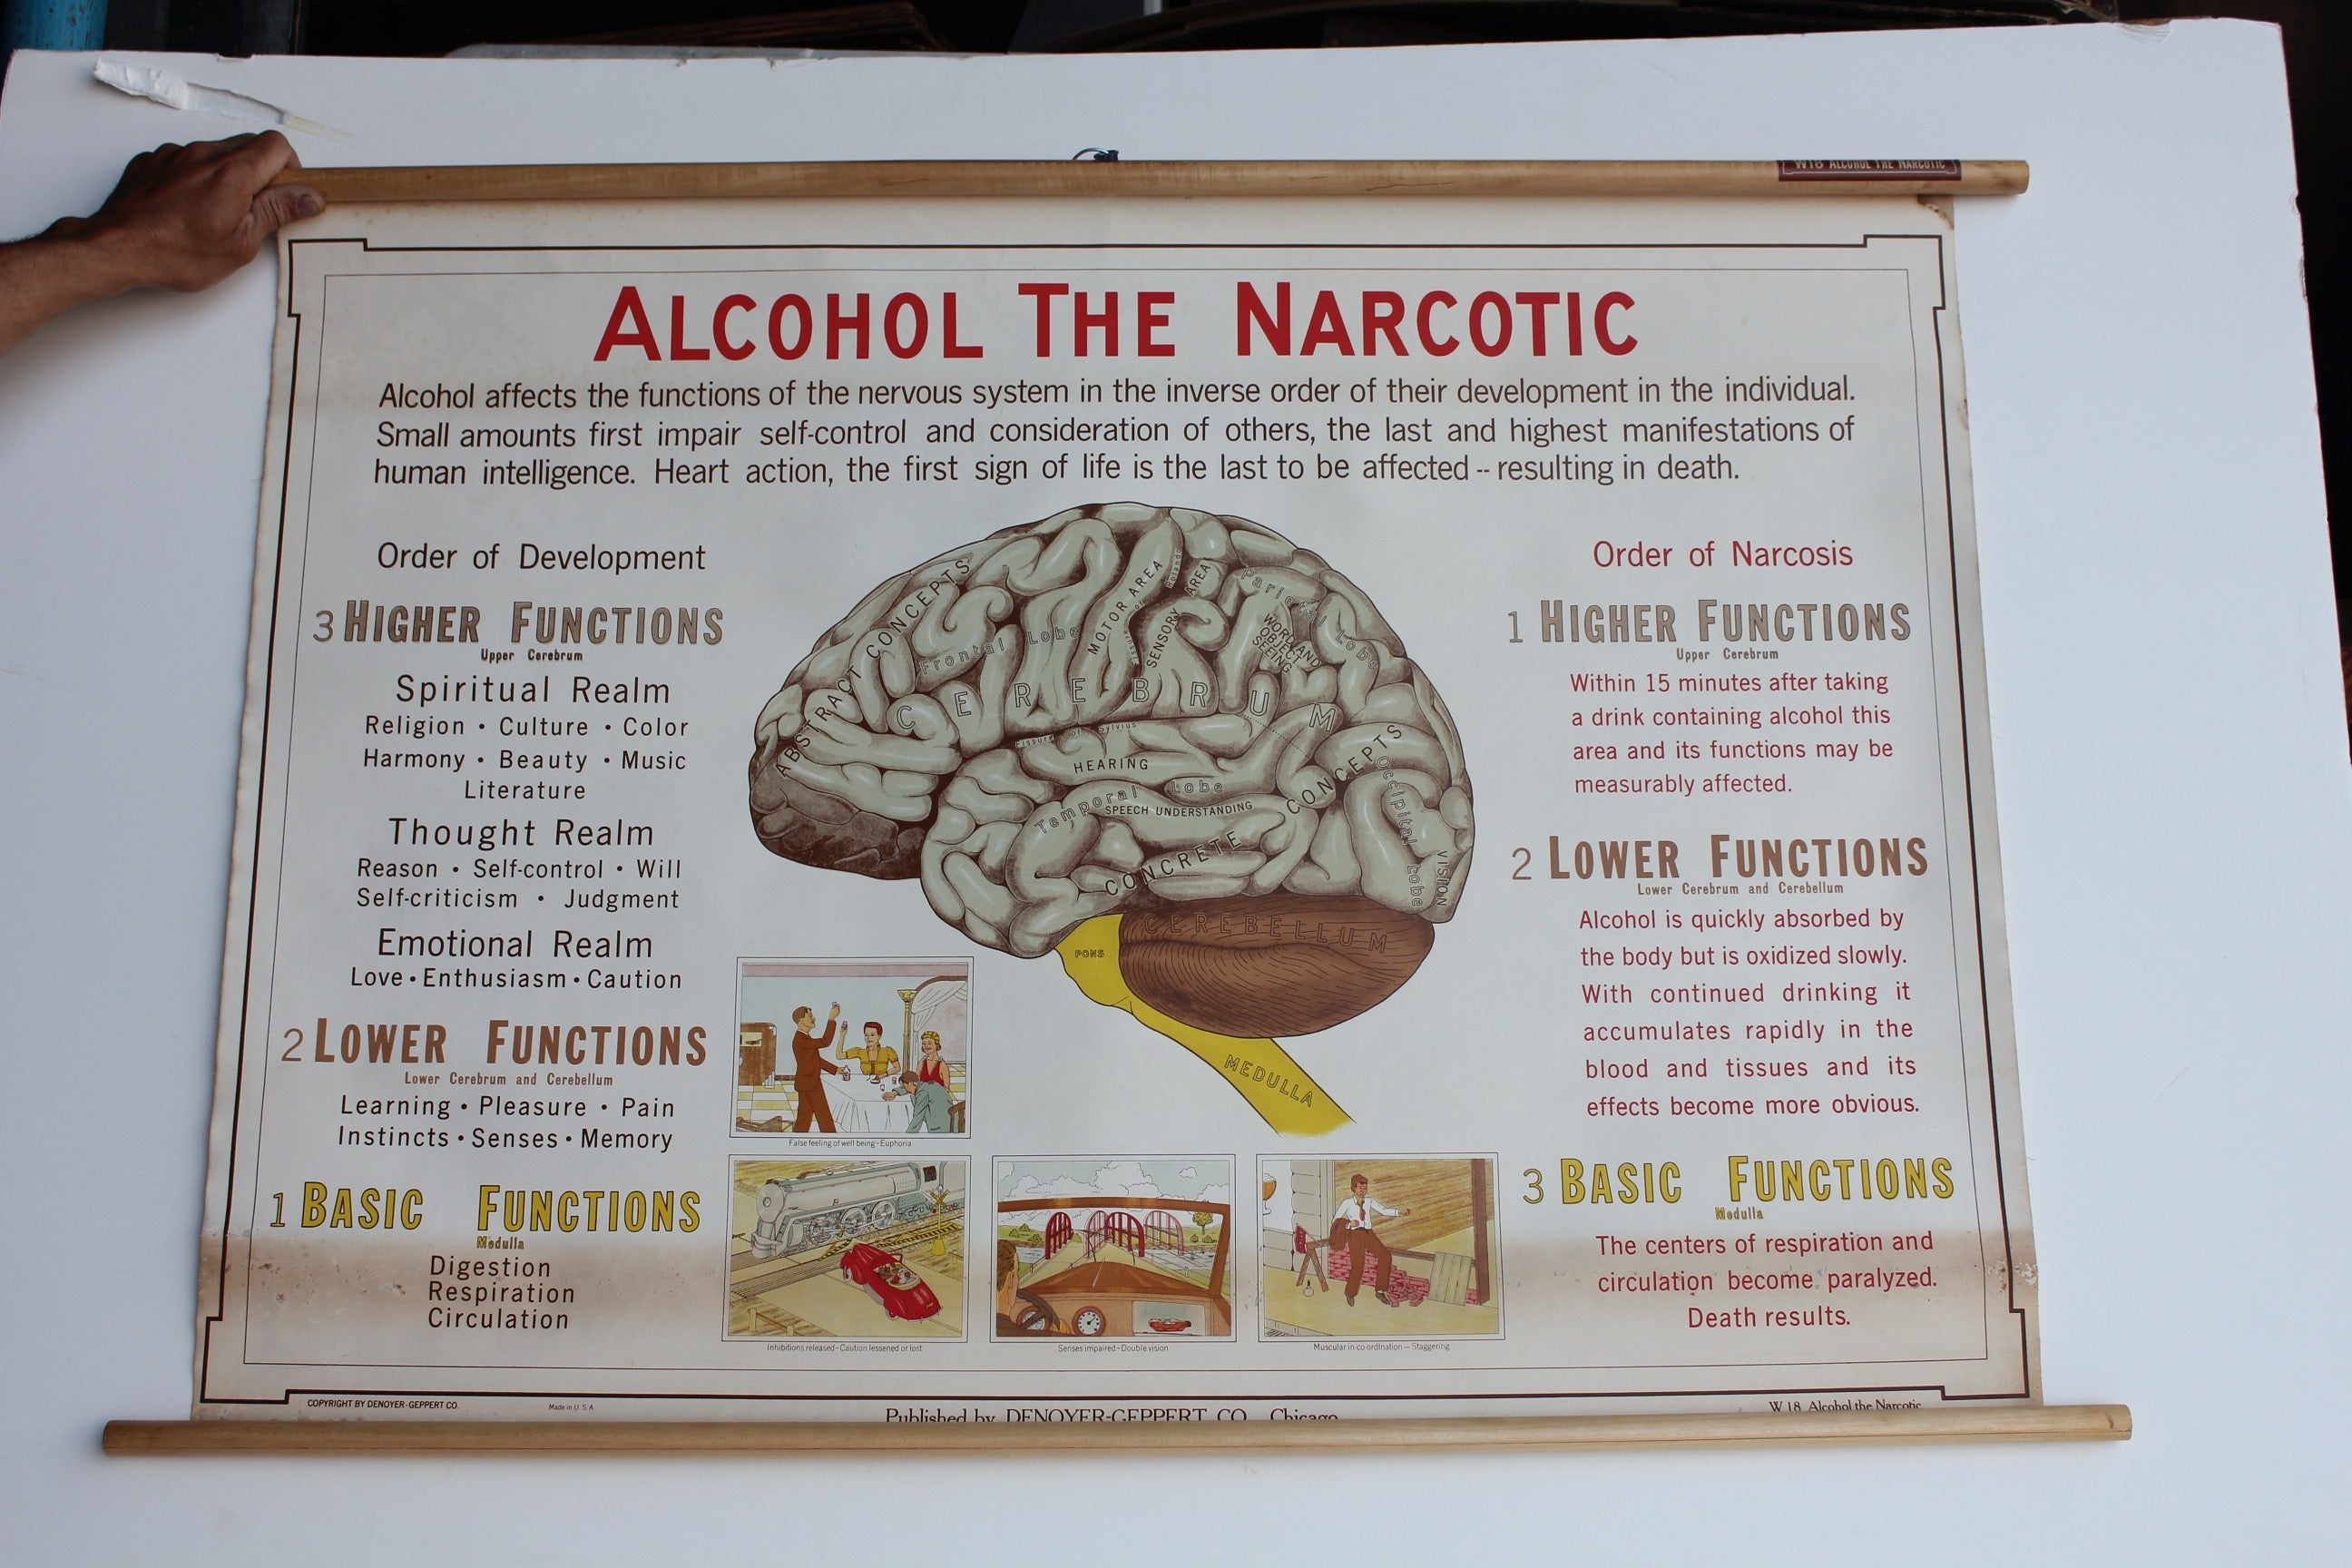 Antique "Alcohol The Narcotic" Poster